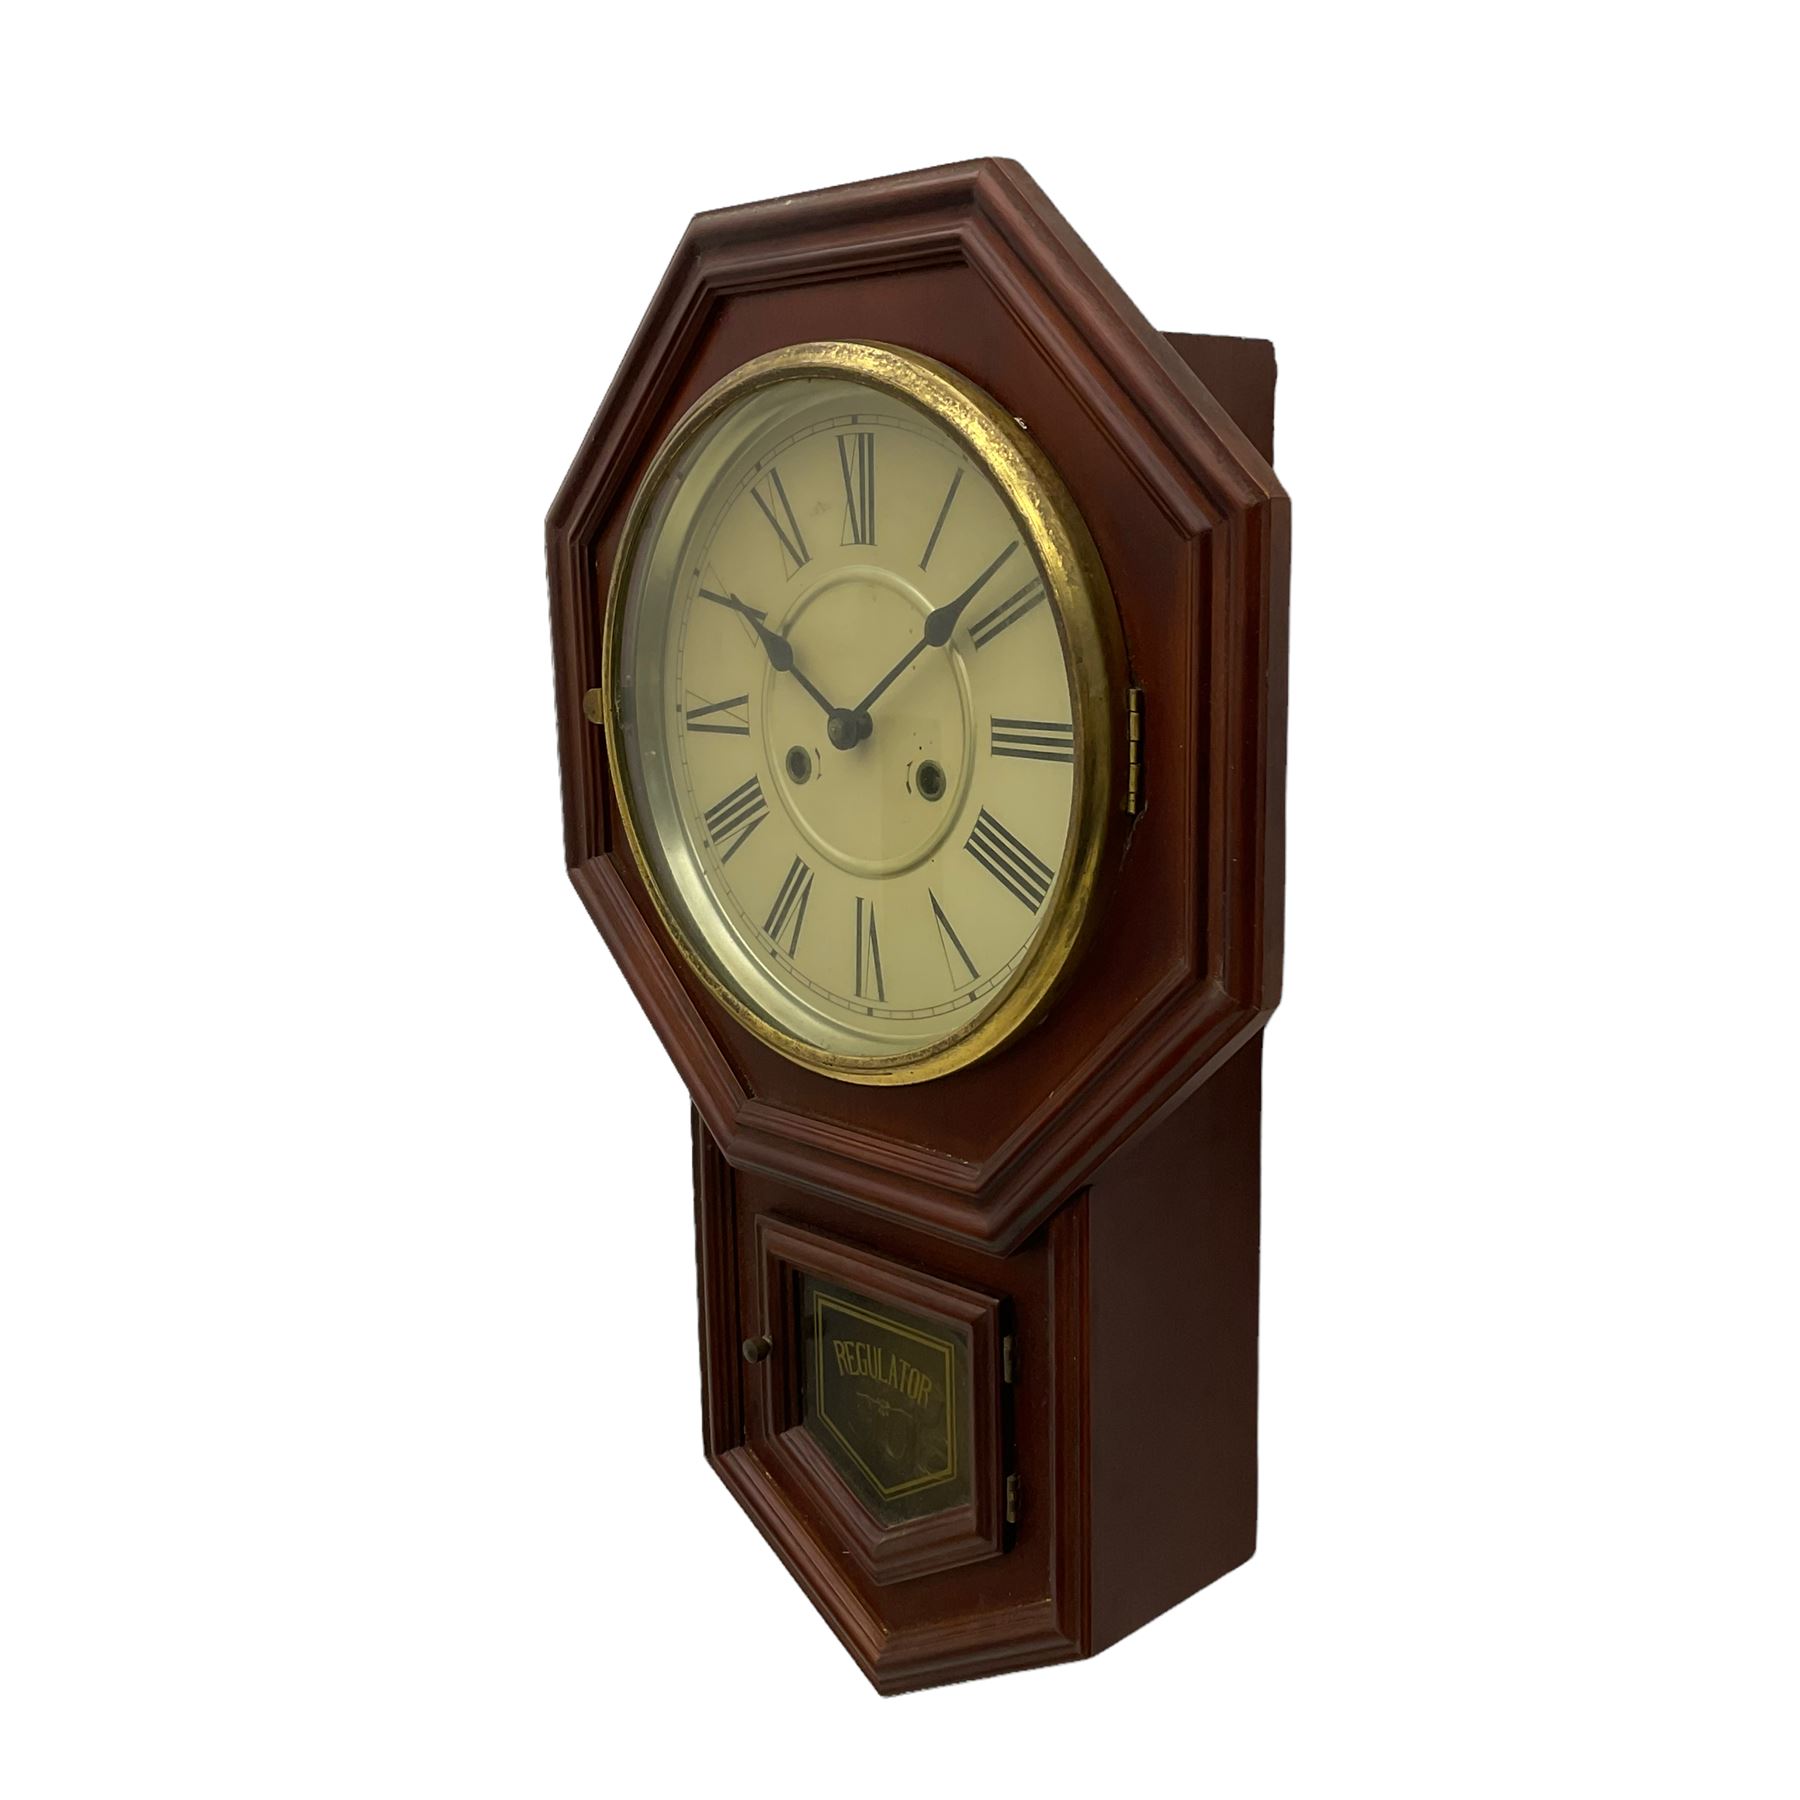 A mahogany effect American early 20th century �regulator� wall clock with an octagonal wooden dial s - Image 2 of 4